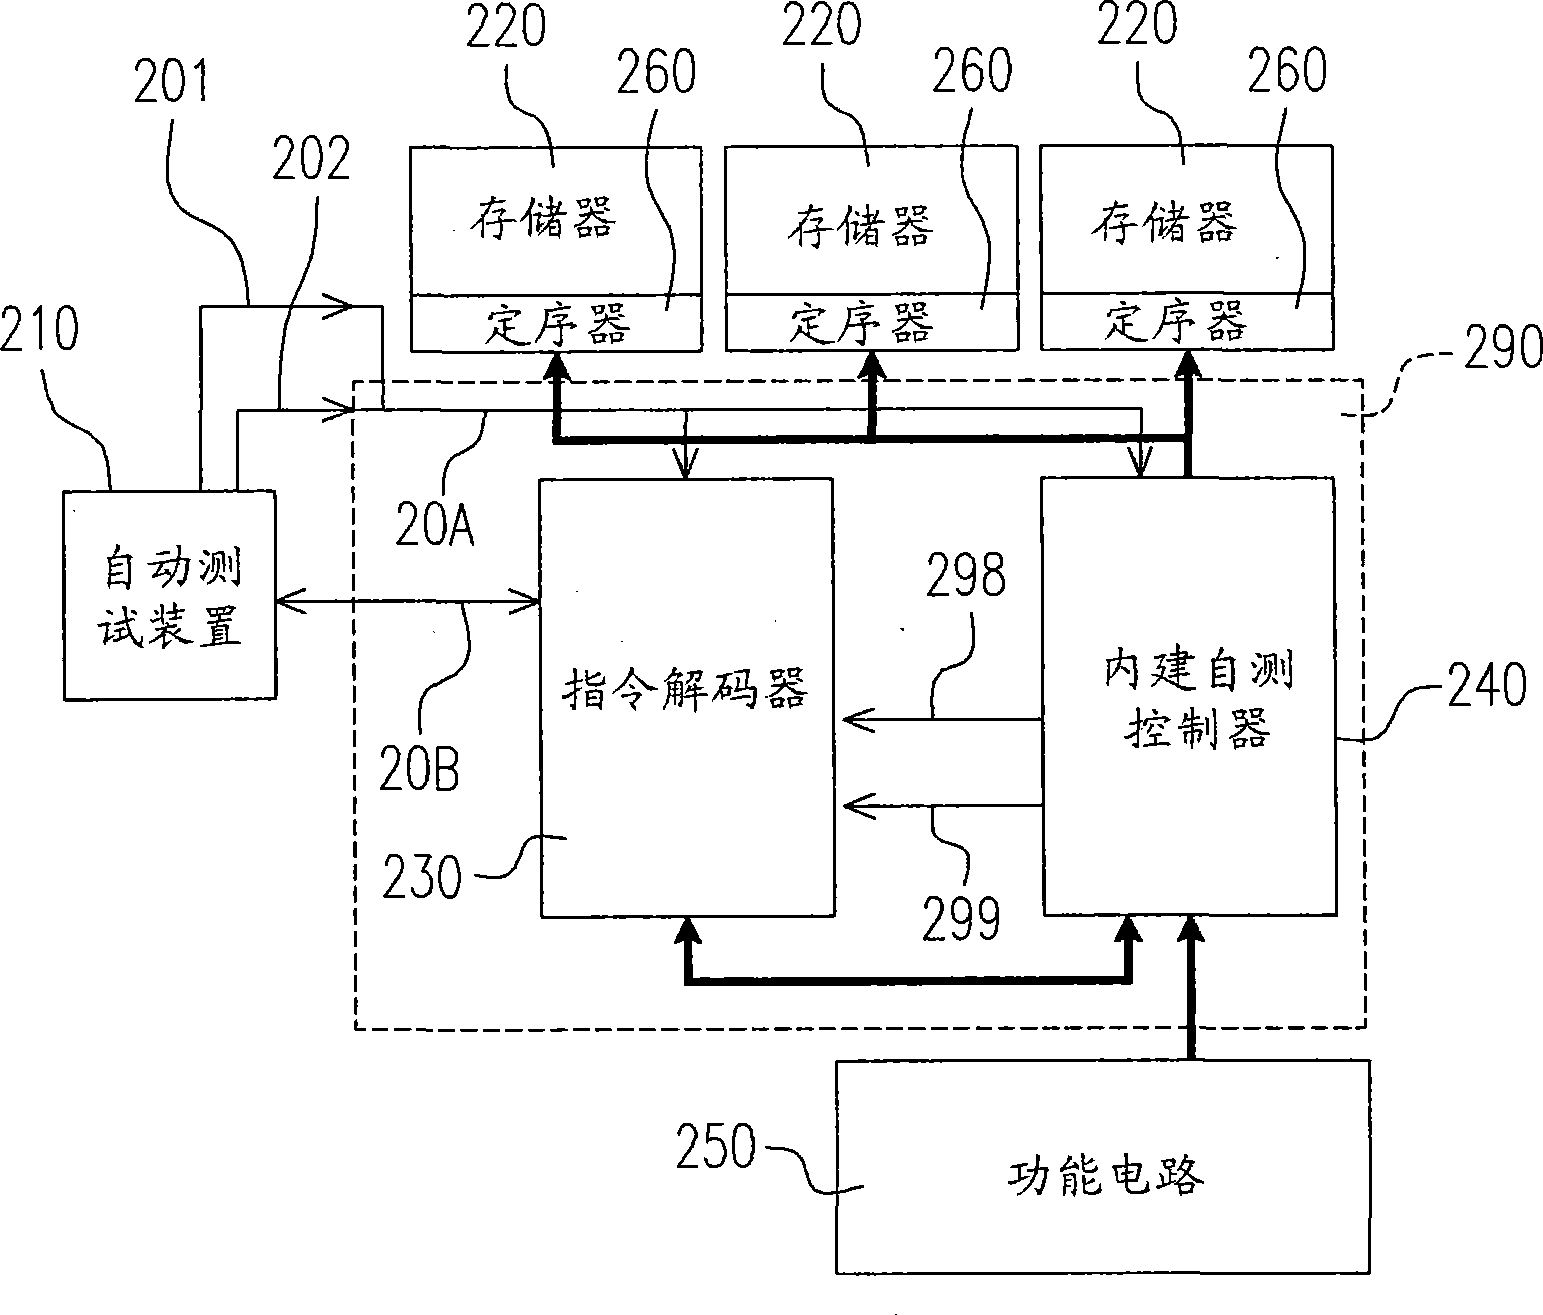 Built-in self-testing circuit and clock switching circuit of programmable memory